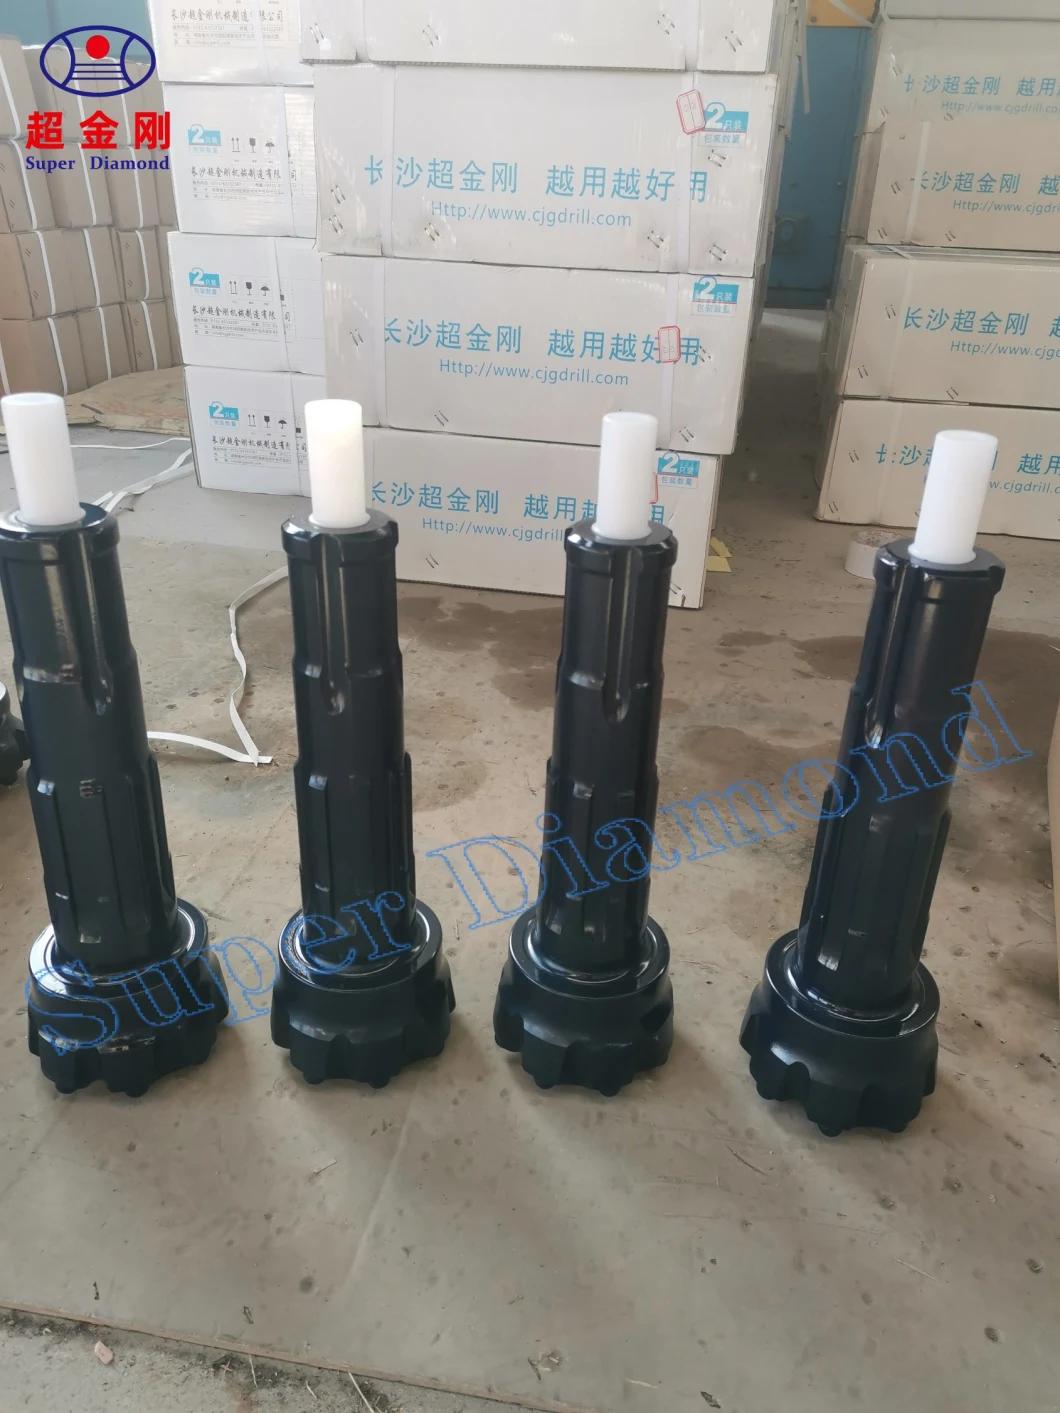 China Factory High Quality Rock Drilling DTH Bit for 5inch Hammer Mission50 / M50 for Mining